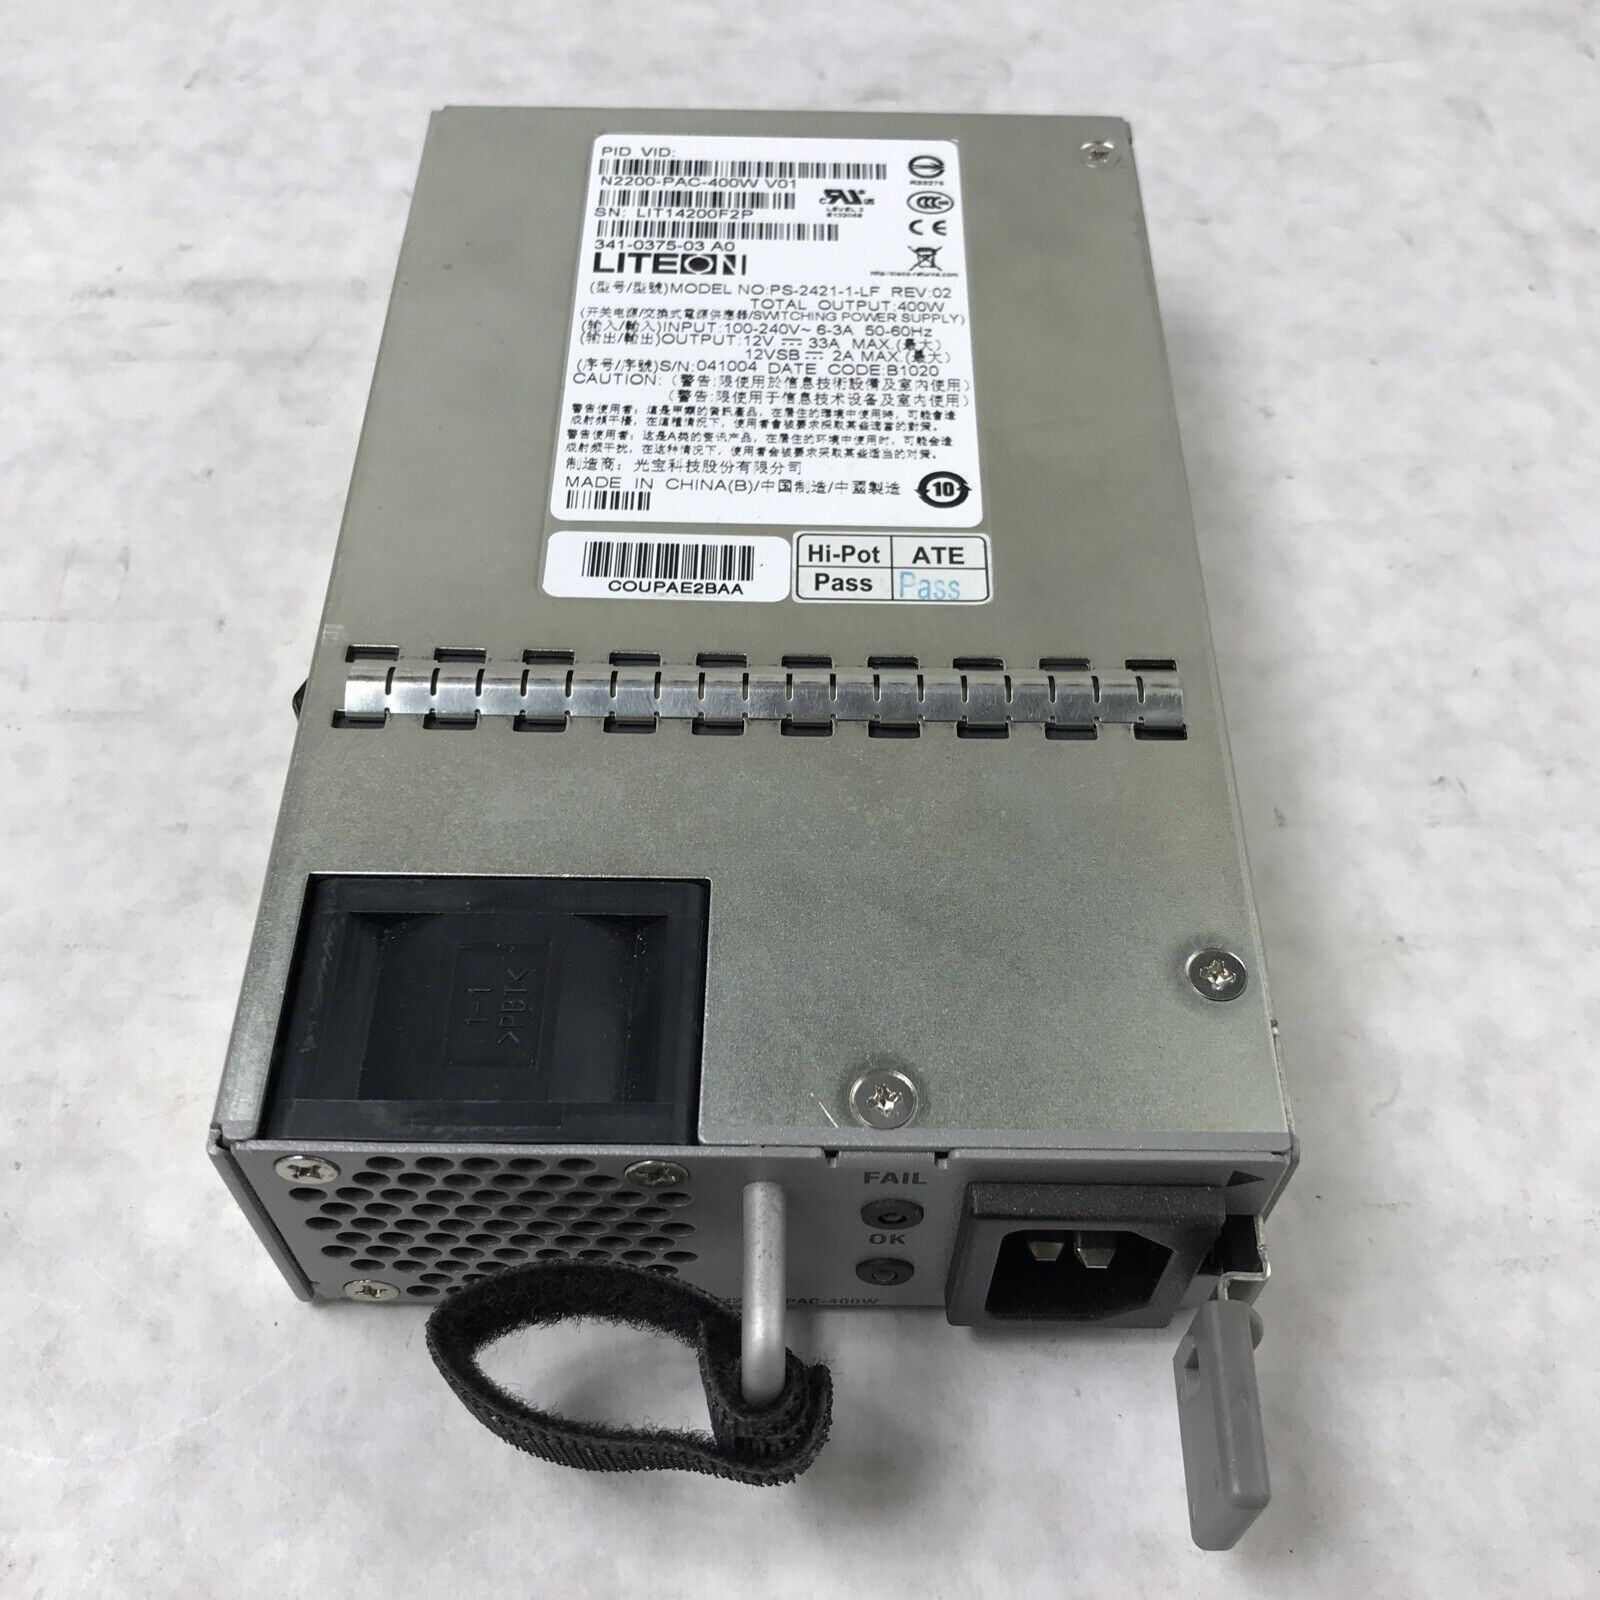 Lot of 2 Liteon PS-2421-1-LF 400W 6.0A 240V 60Hz Switching Power Supply N2200